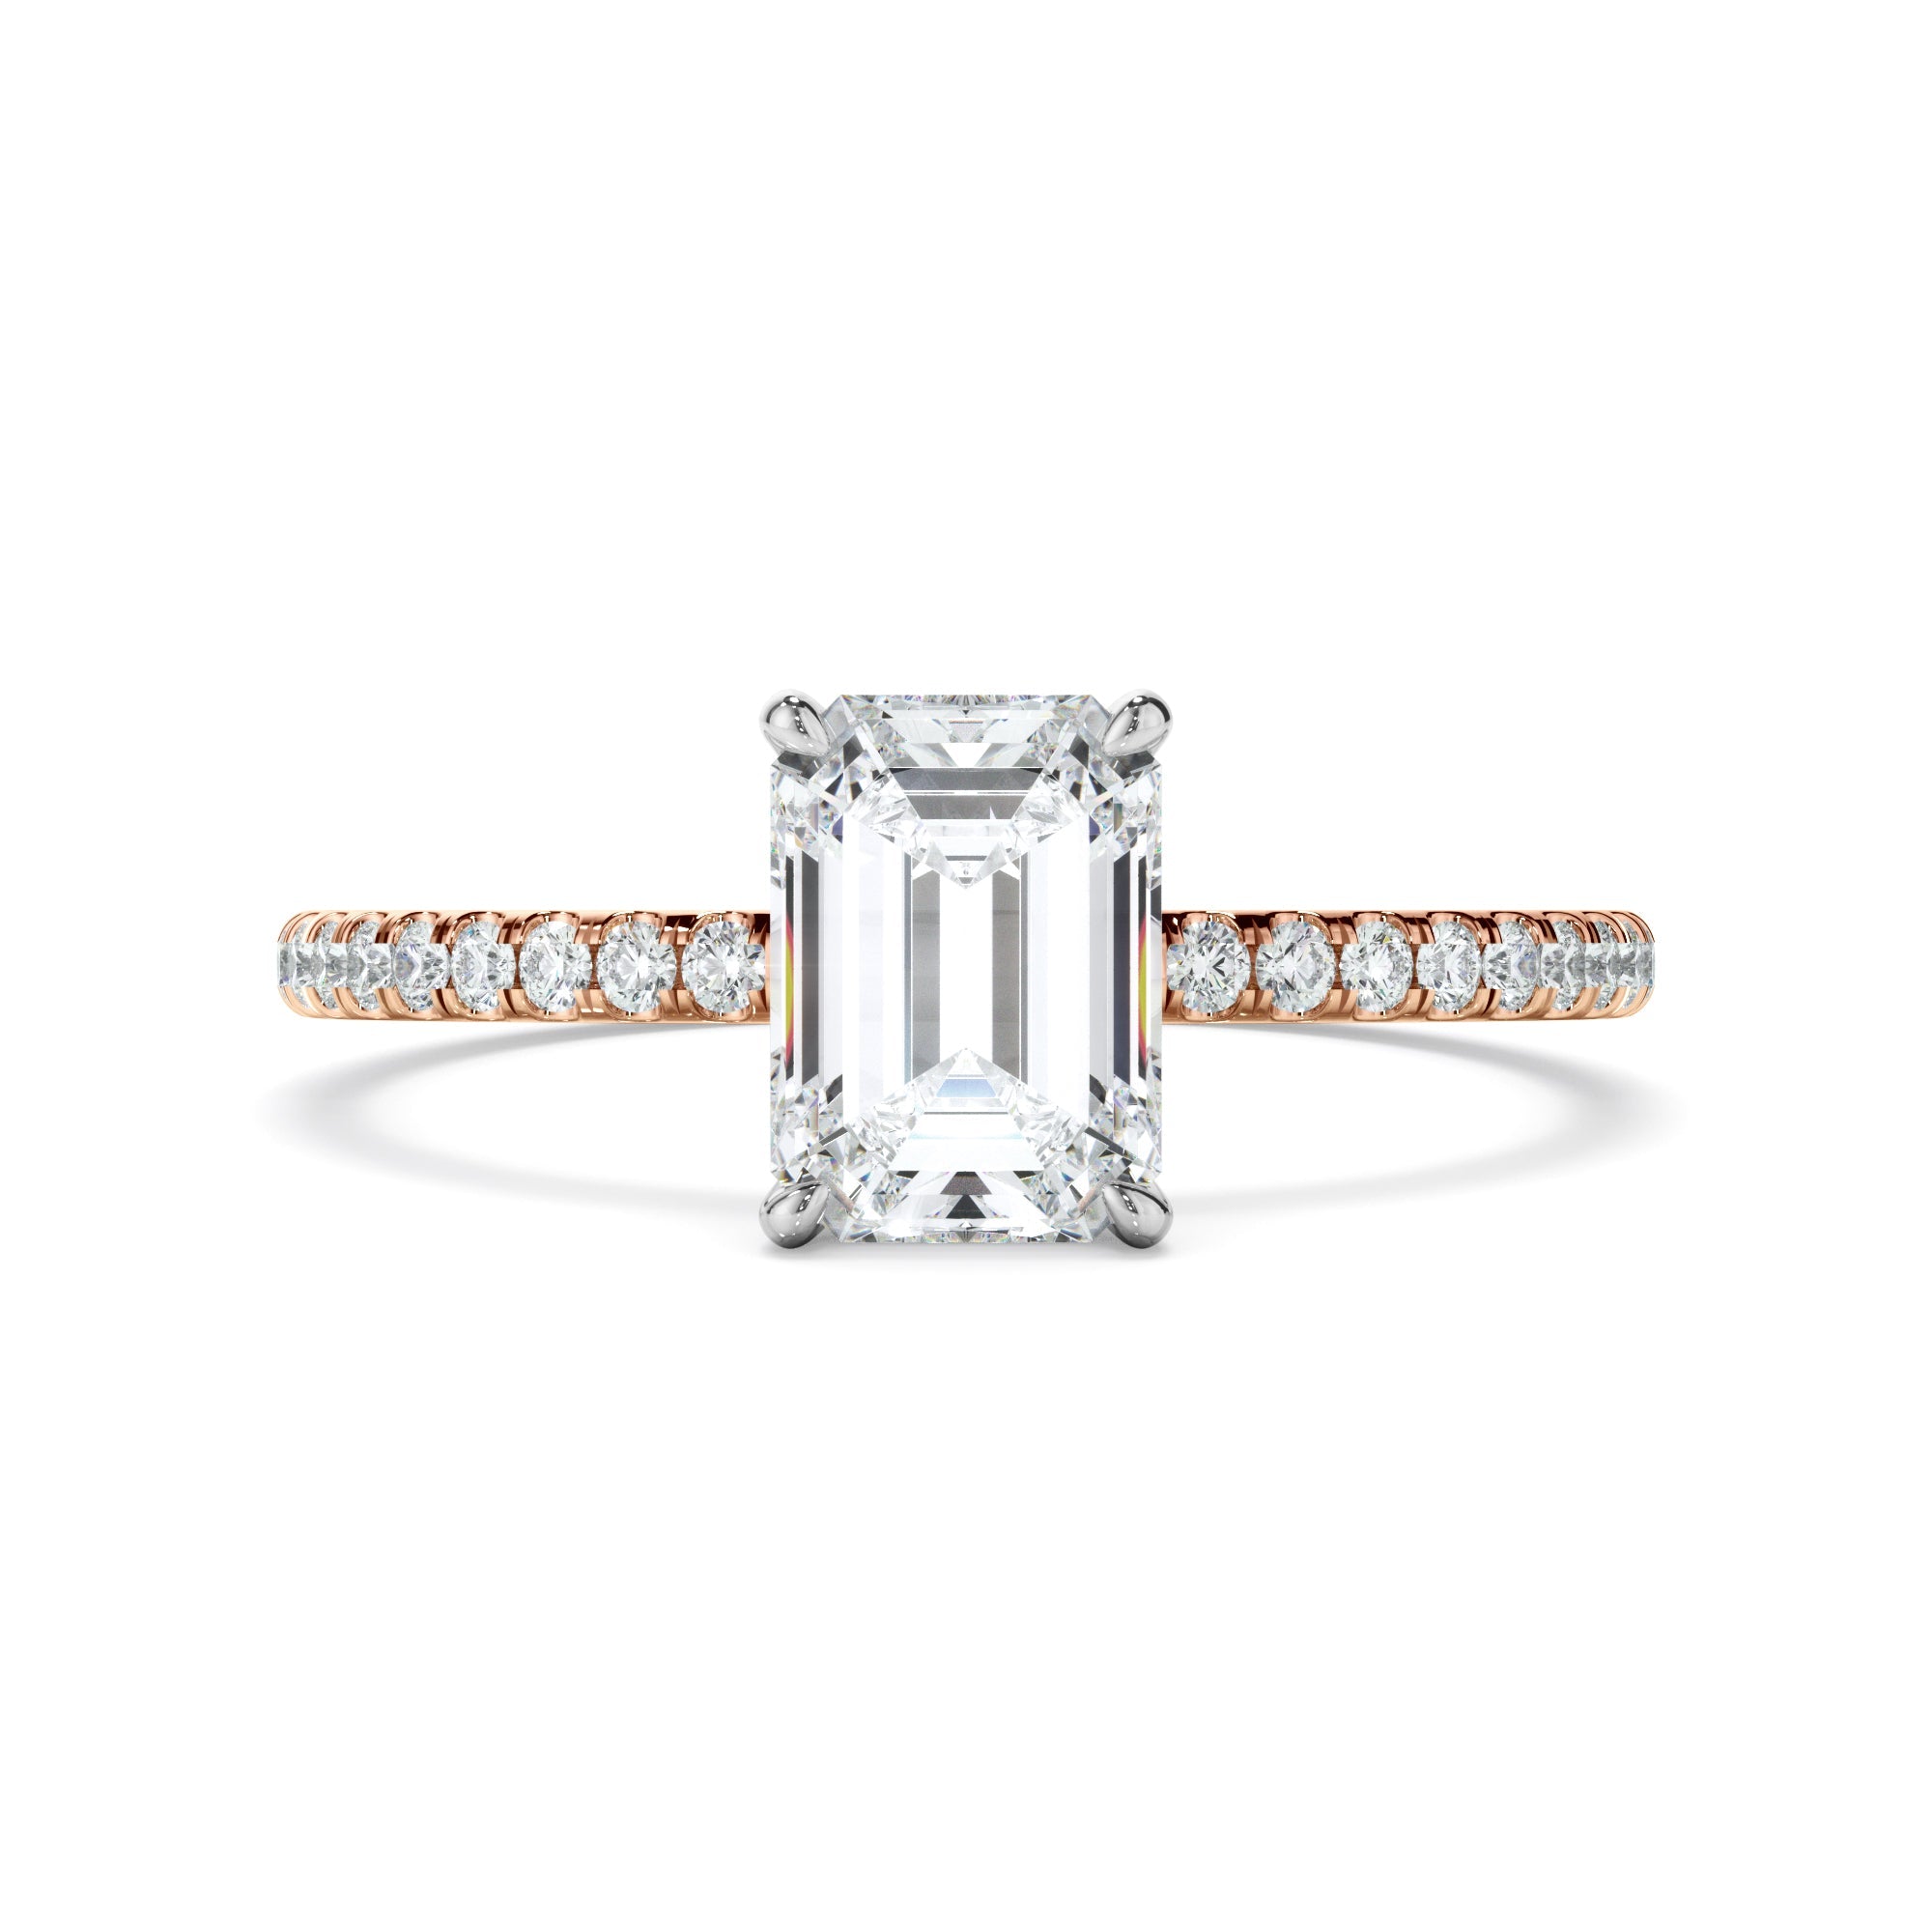 Emerald Cut Diamond Solitaire Engagement Ring With Pave Band